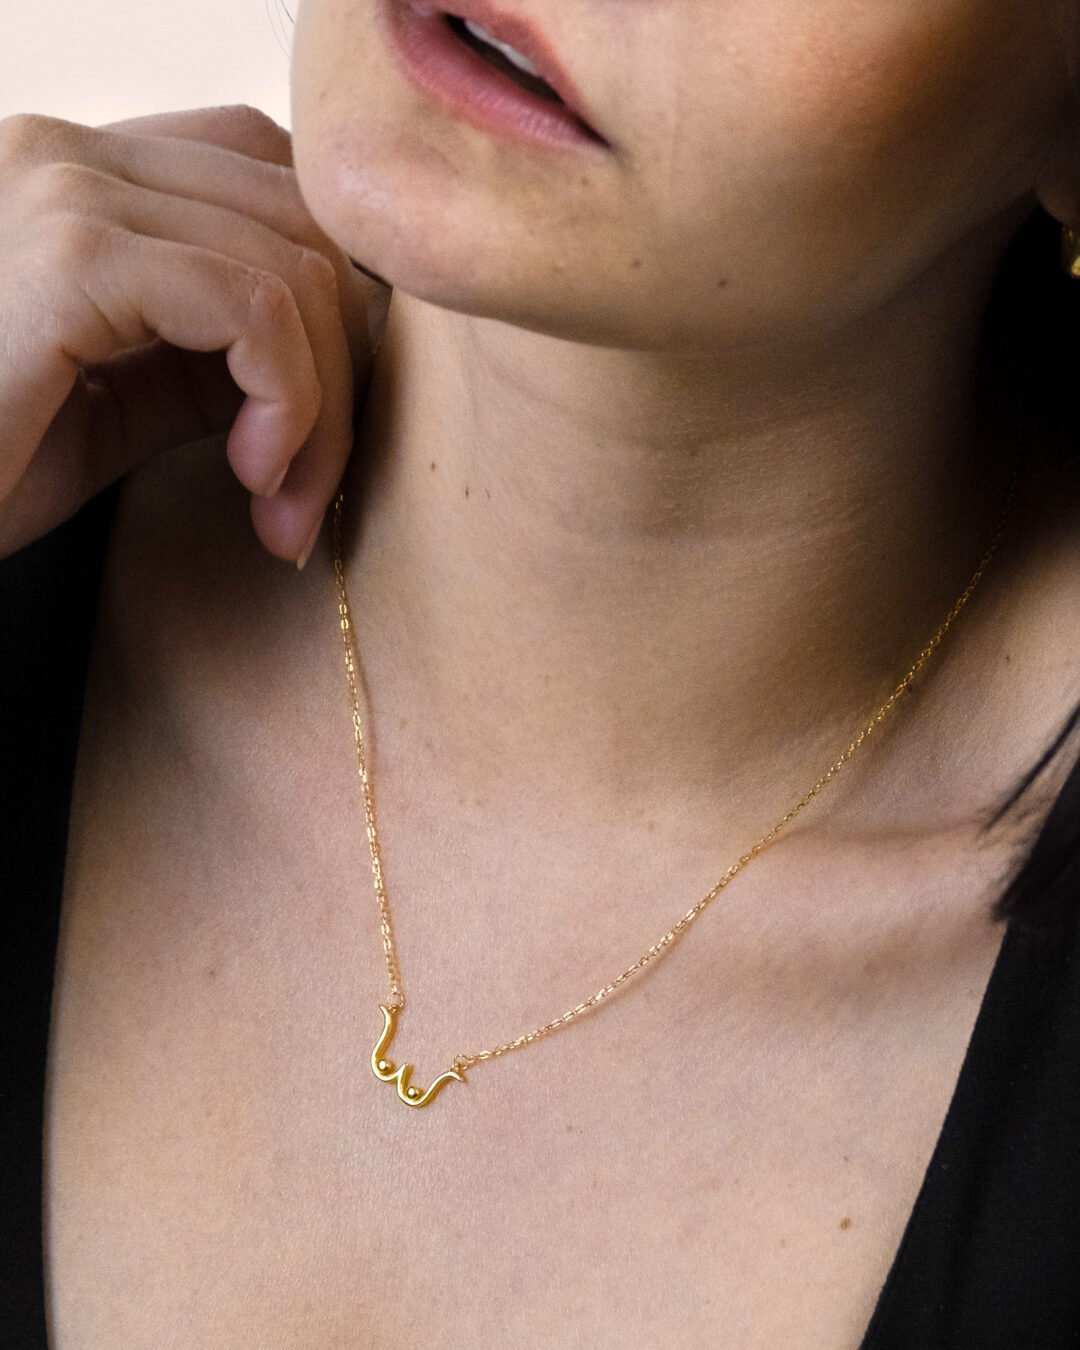 two-of-a-kind necklace, simple necklace, boobs necklace, amorphe necklace, gold plated